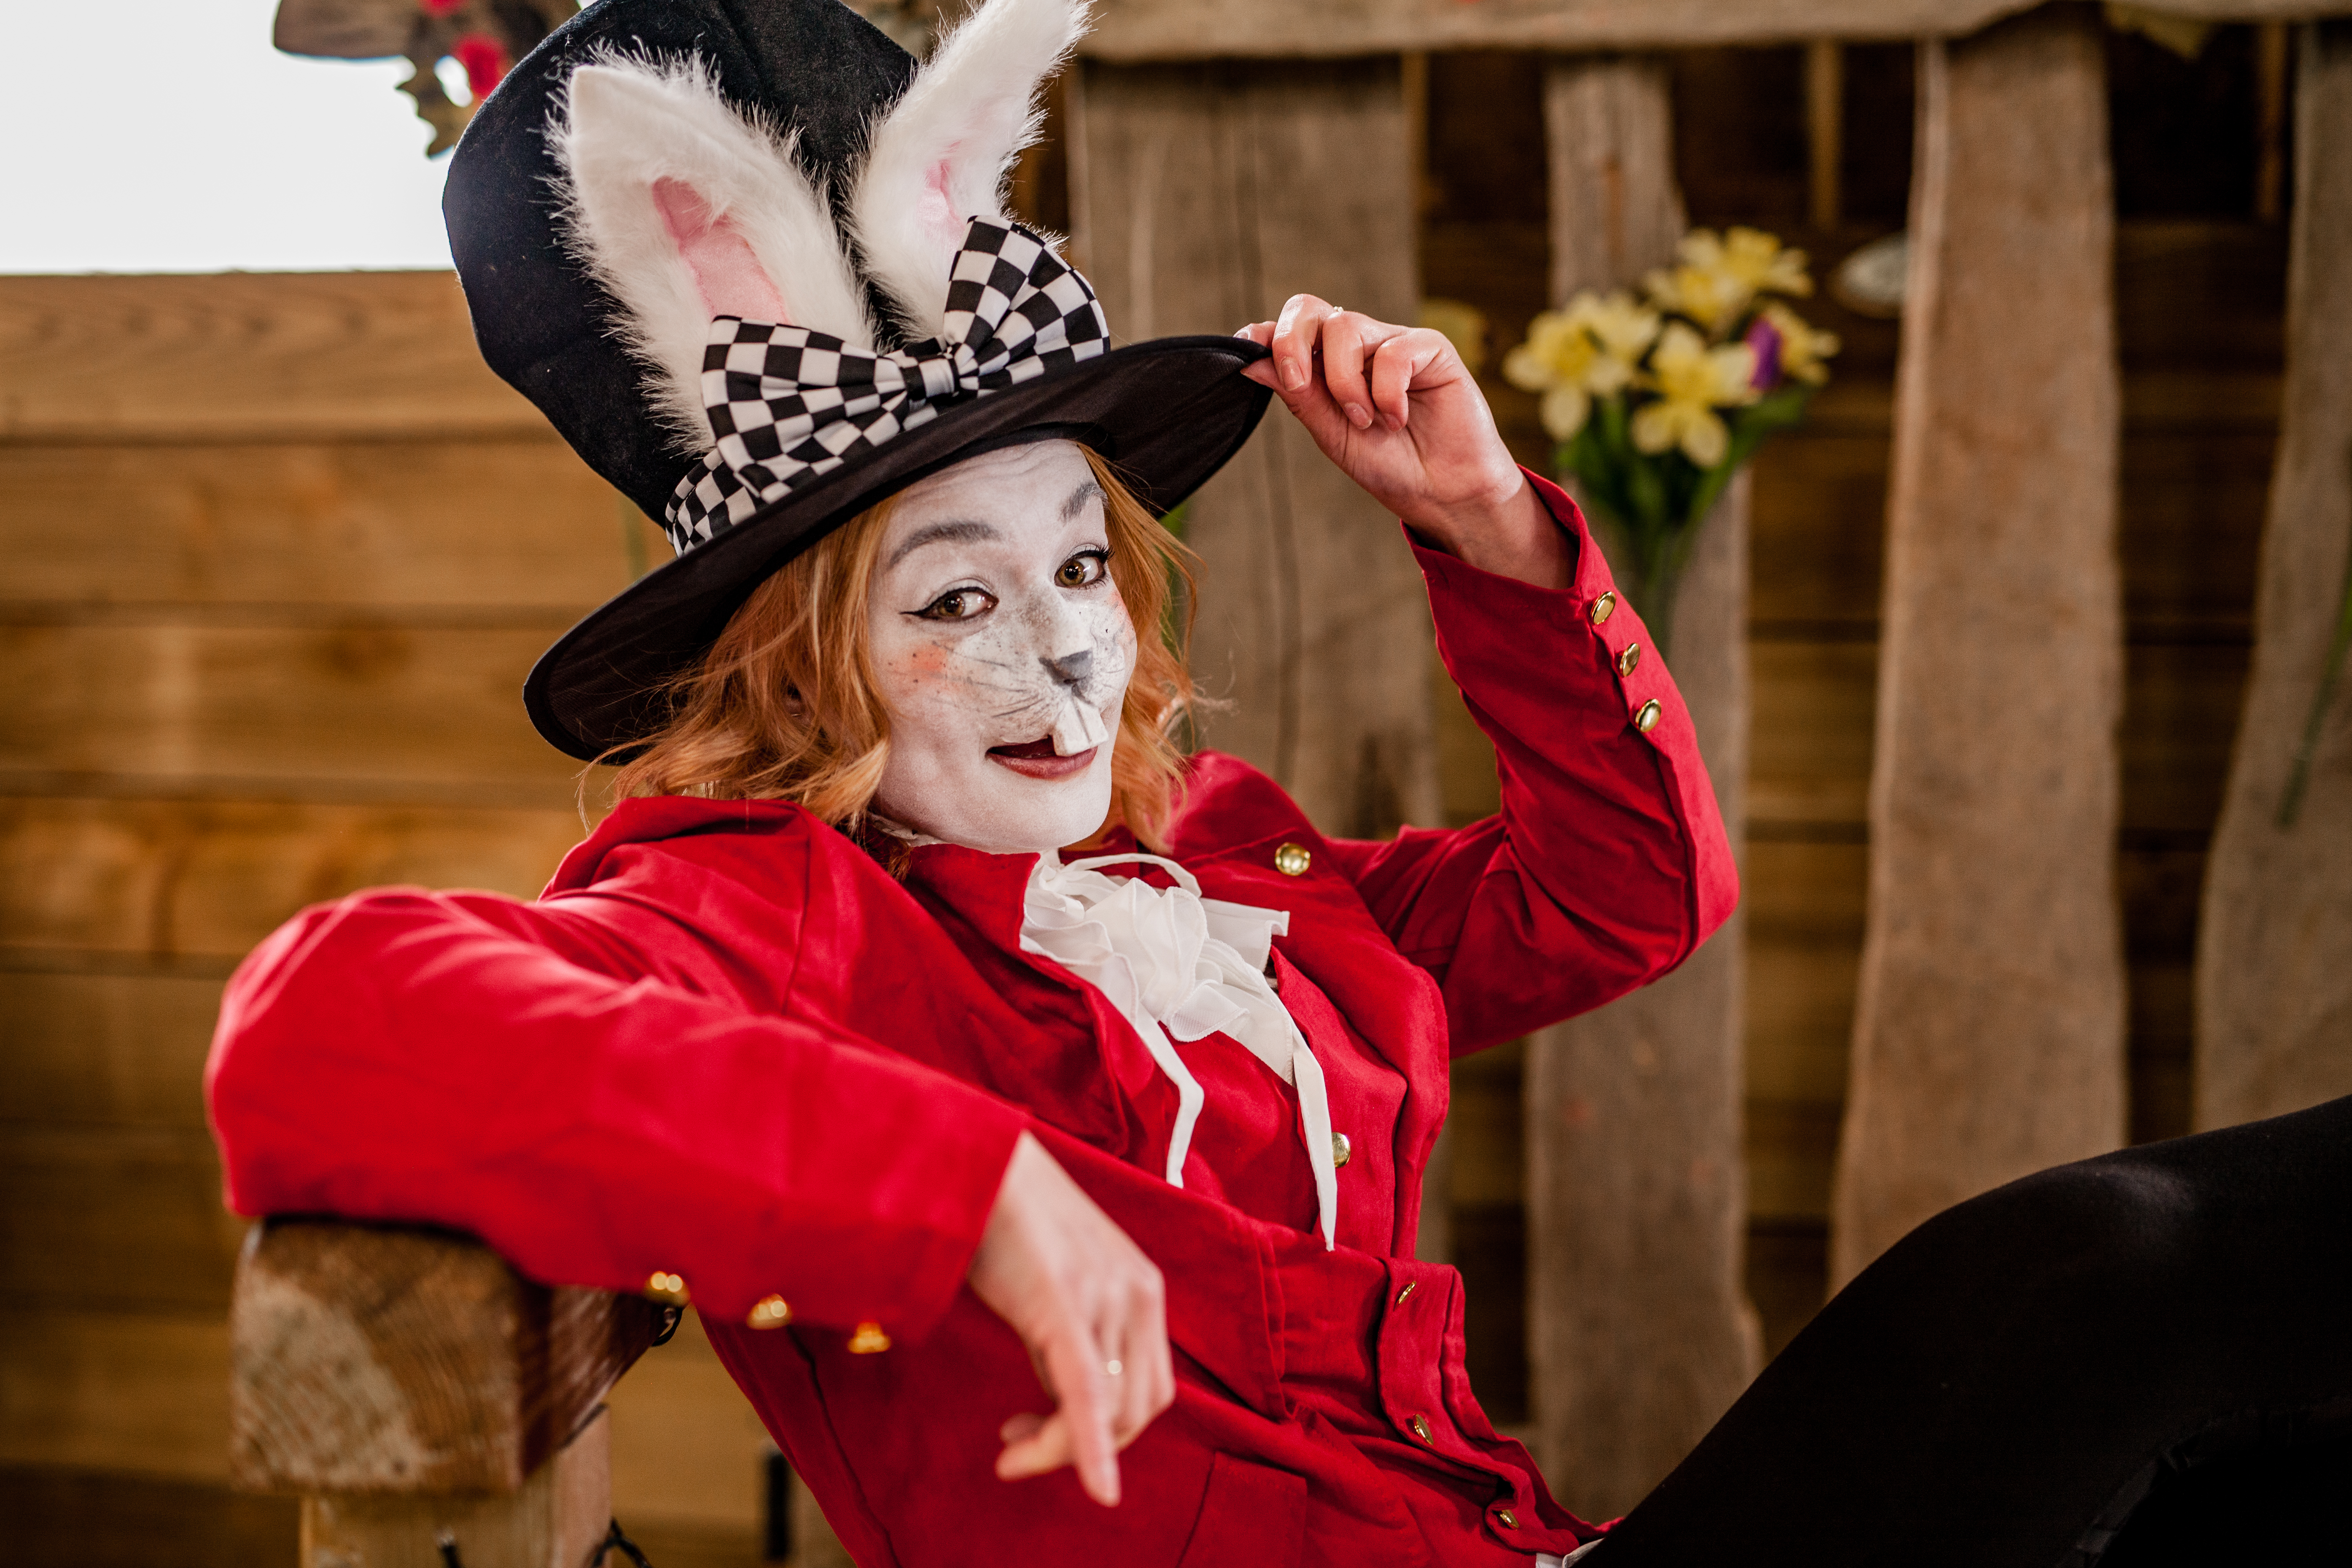 Tapnell Farm Park will host an Alice in Wonderland themed event this Easter (Tapnell Famr/PA)